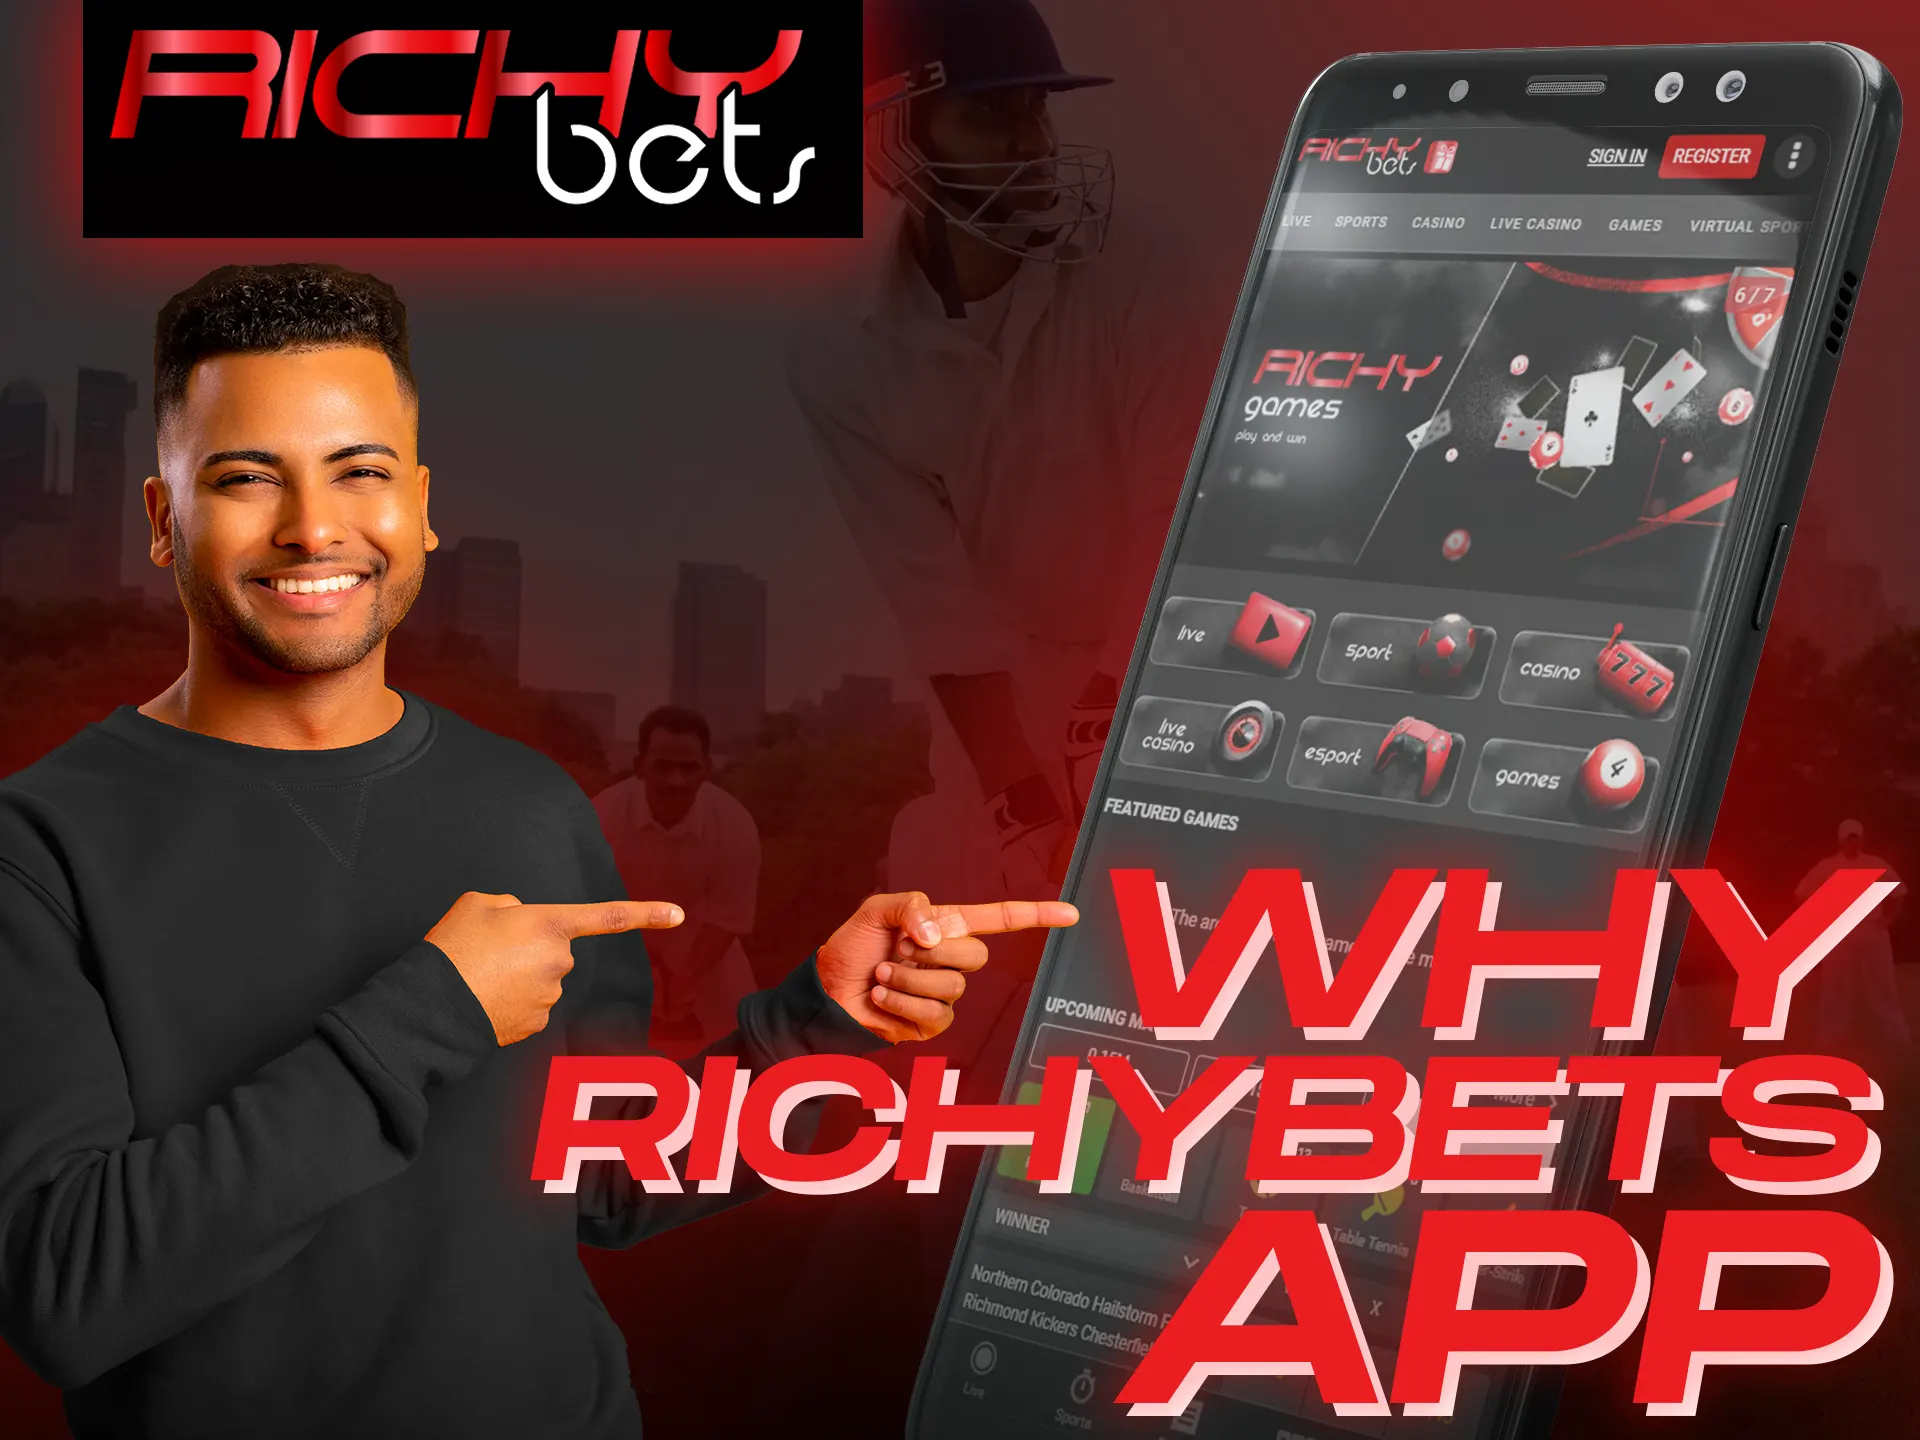 Choose the Richybets app for making bets.